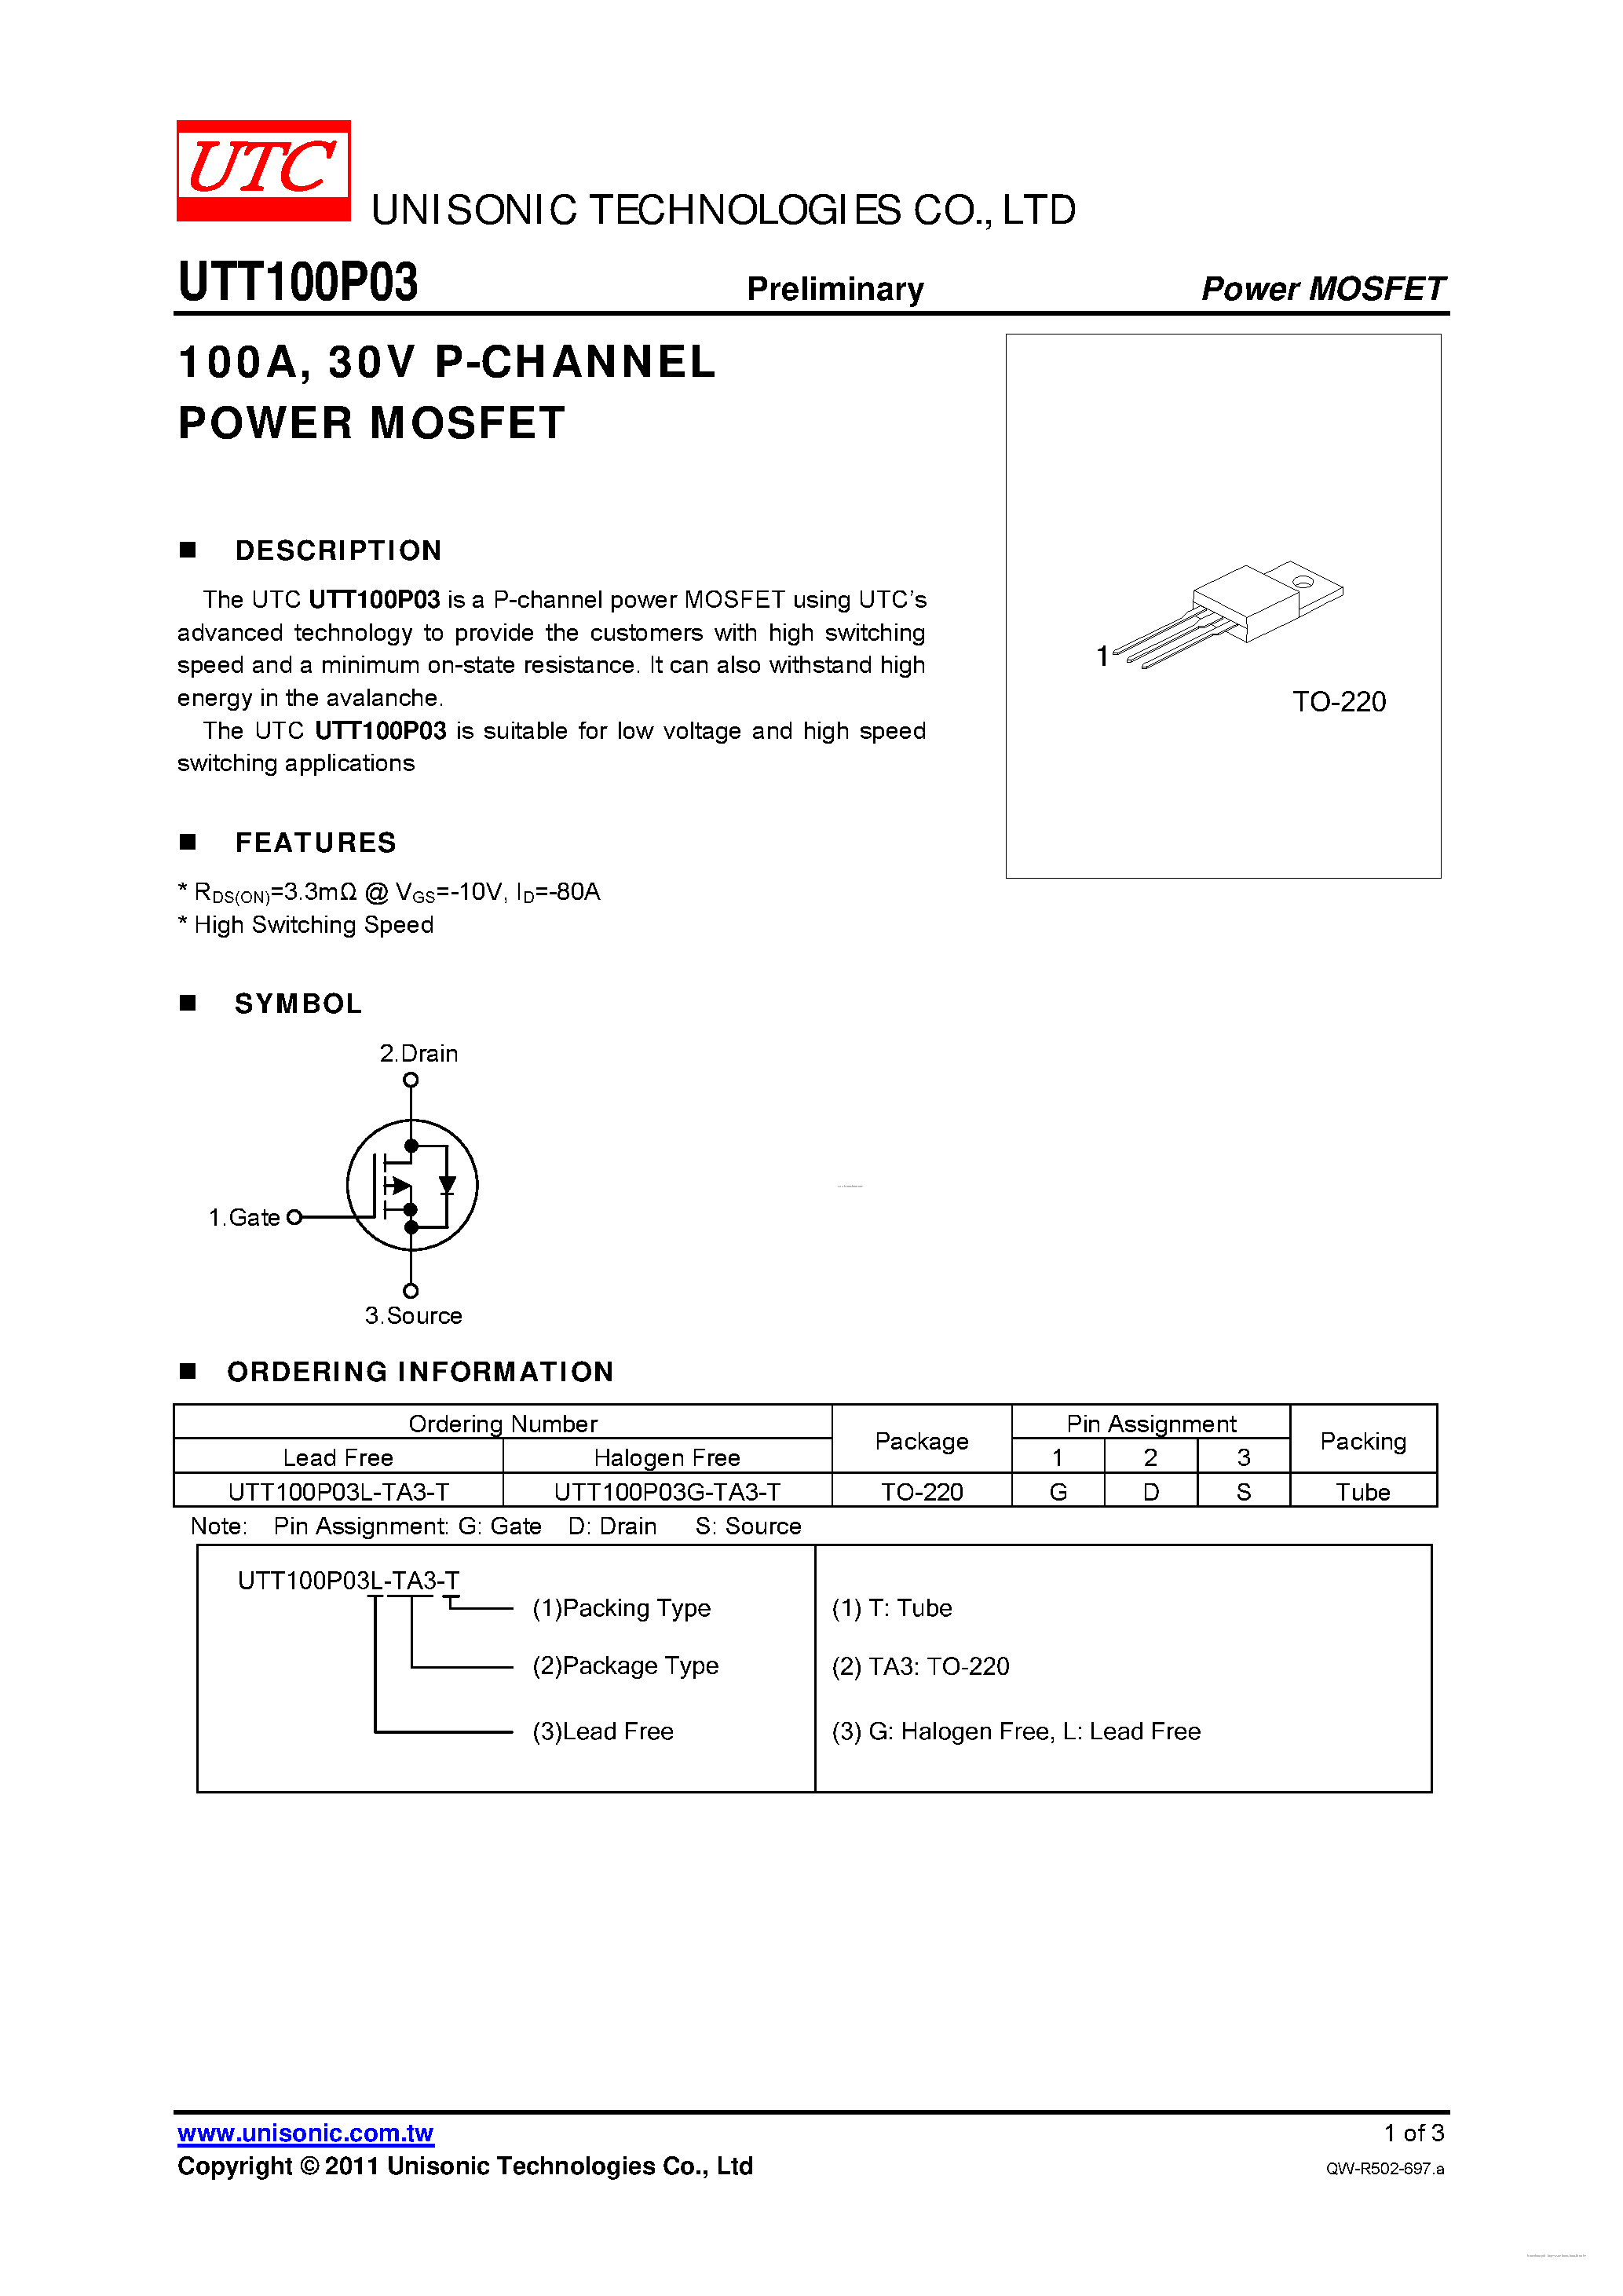 Datasheet UTT100P03 - P-CHANNEL POWER MOSFET page 1